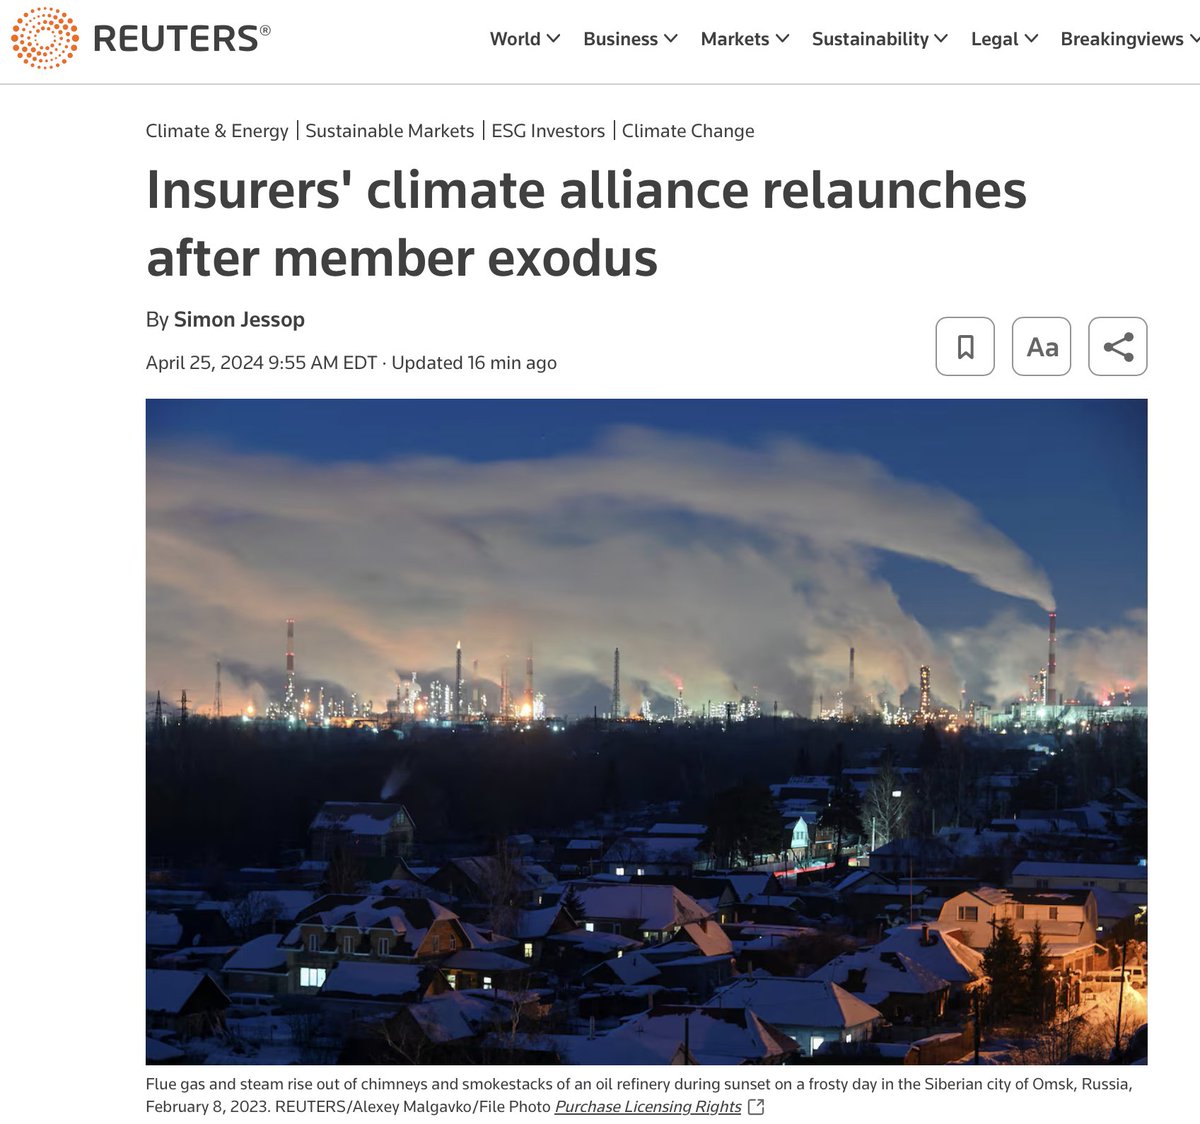 As predicted, ESG 'net zero' insurance industry group rebrands and relaunches:

The insurance group, called the Net Zero Insurance Alliance (NZIA), will be disbanded and replaced by the Forum for Insurance Transition to Net Zero (FIT), the United Nations Environment Programme,